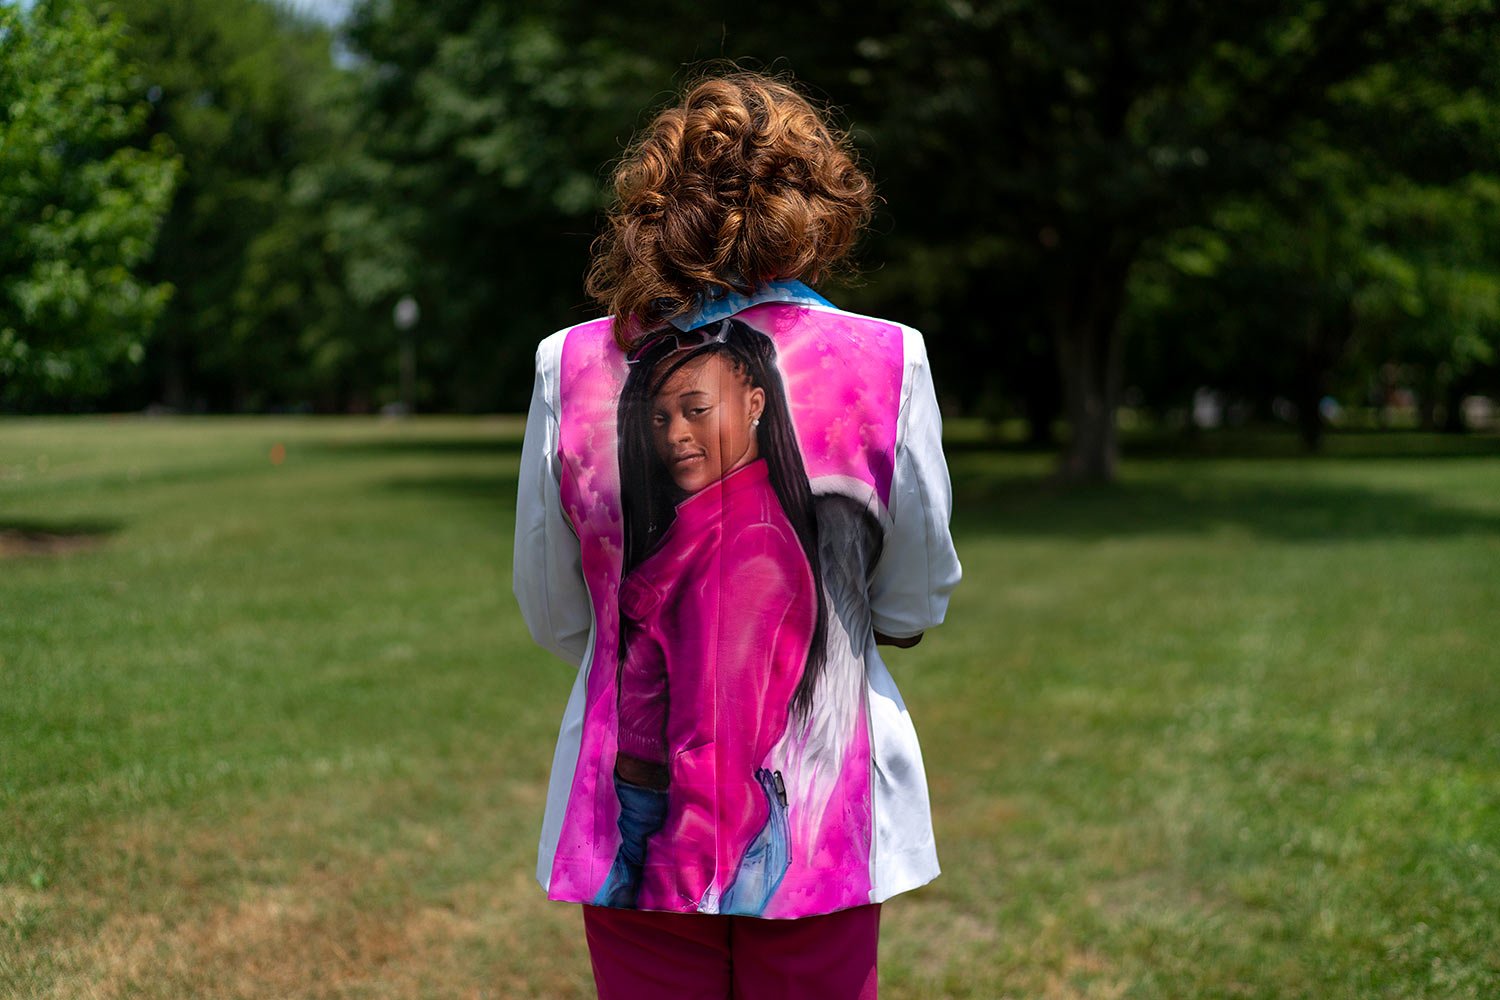  Candy Linear wears a jacket decorated with an image of her daughter, Nylah, who was shot and killed at the age of 16, as Linear attends a gun control rally in Louisville, Ky., Saturday, June 3, 2023. (AP Photo/David Goldman)  